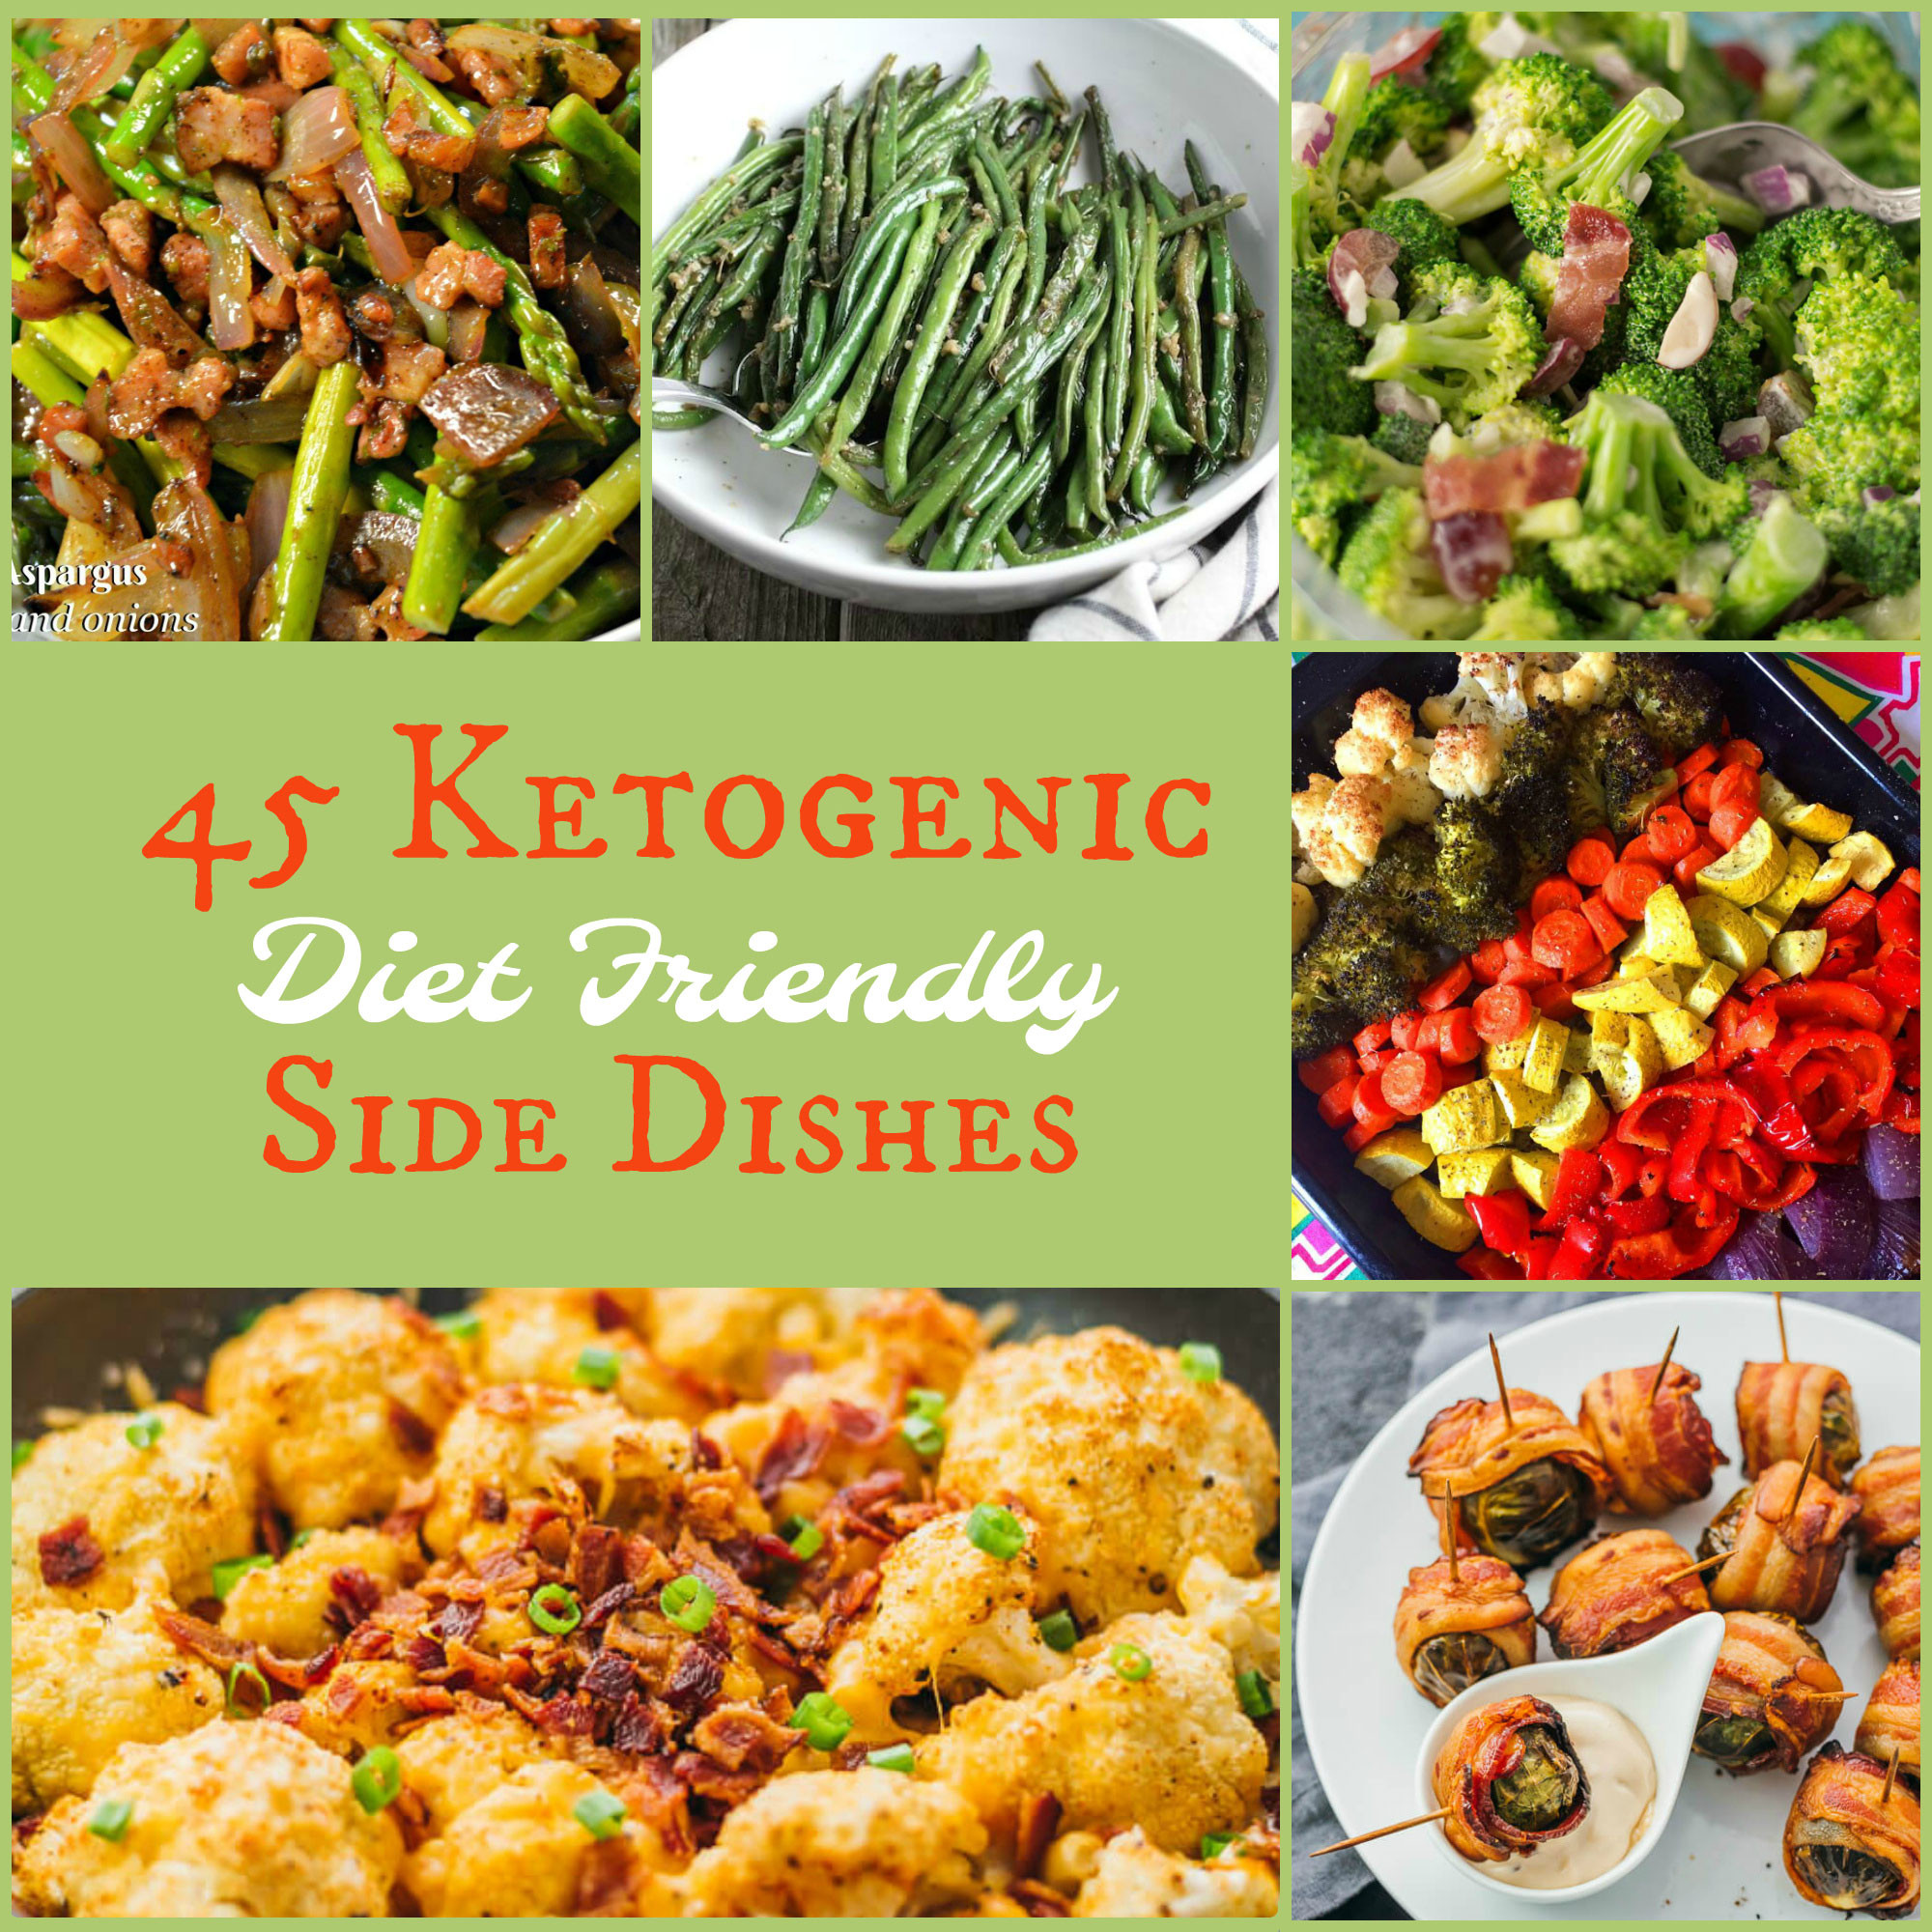 Keto Dinner Sides
 Keto Diet Side Dishes for the Holidays Ketogenic recipe